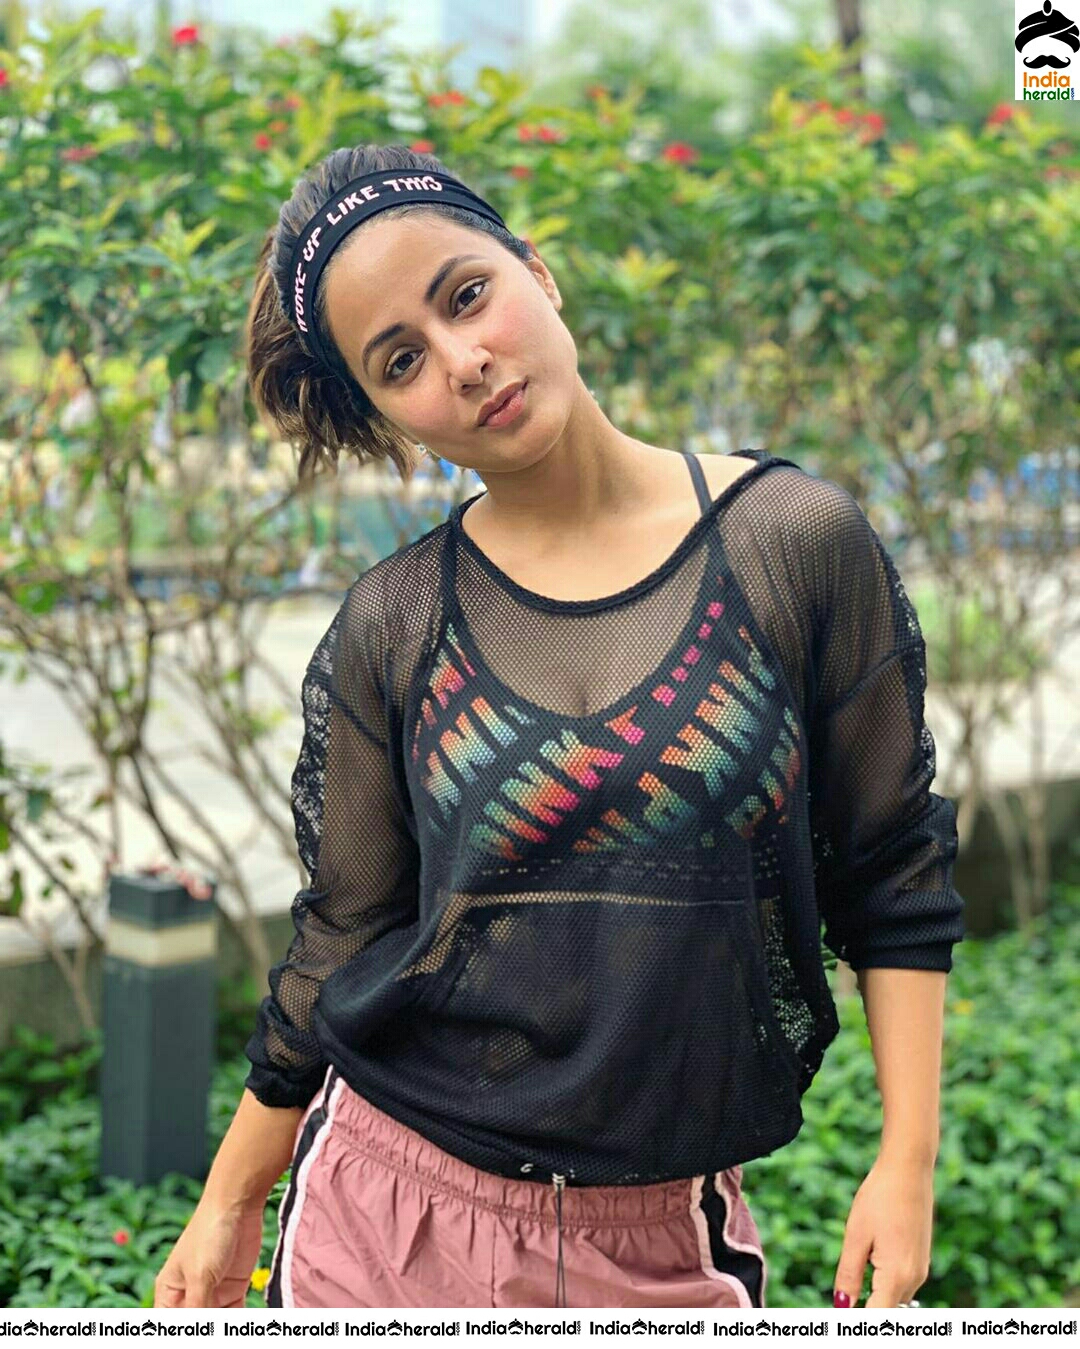 Hina Khan Hot In Black Net Transparent Top In These Photoshoot